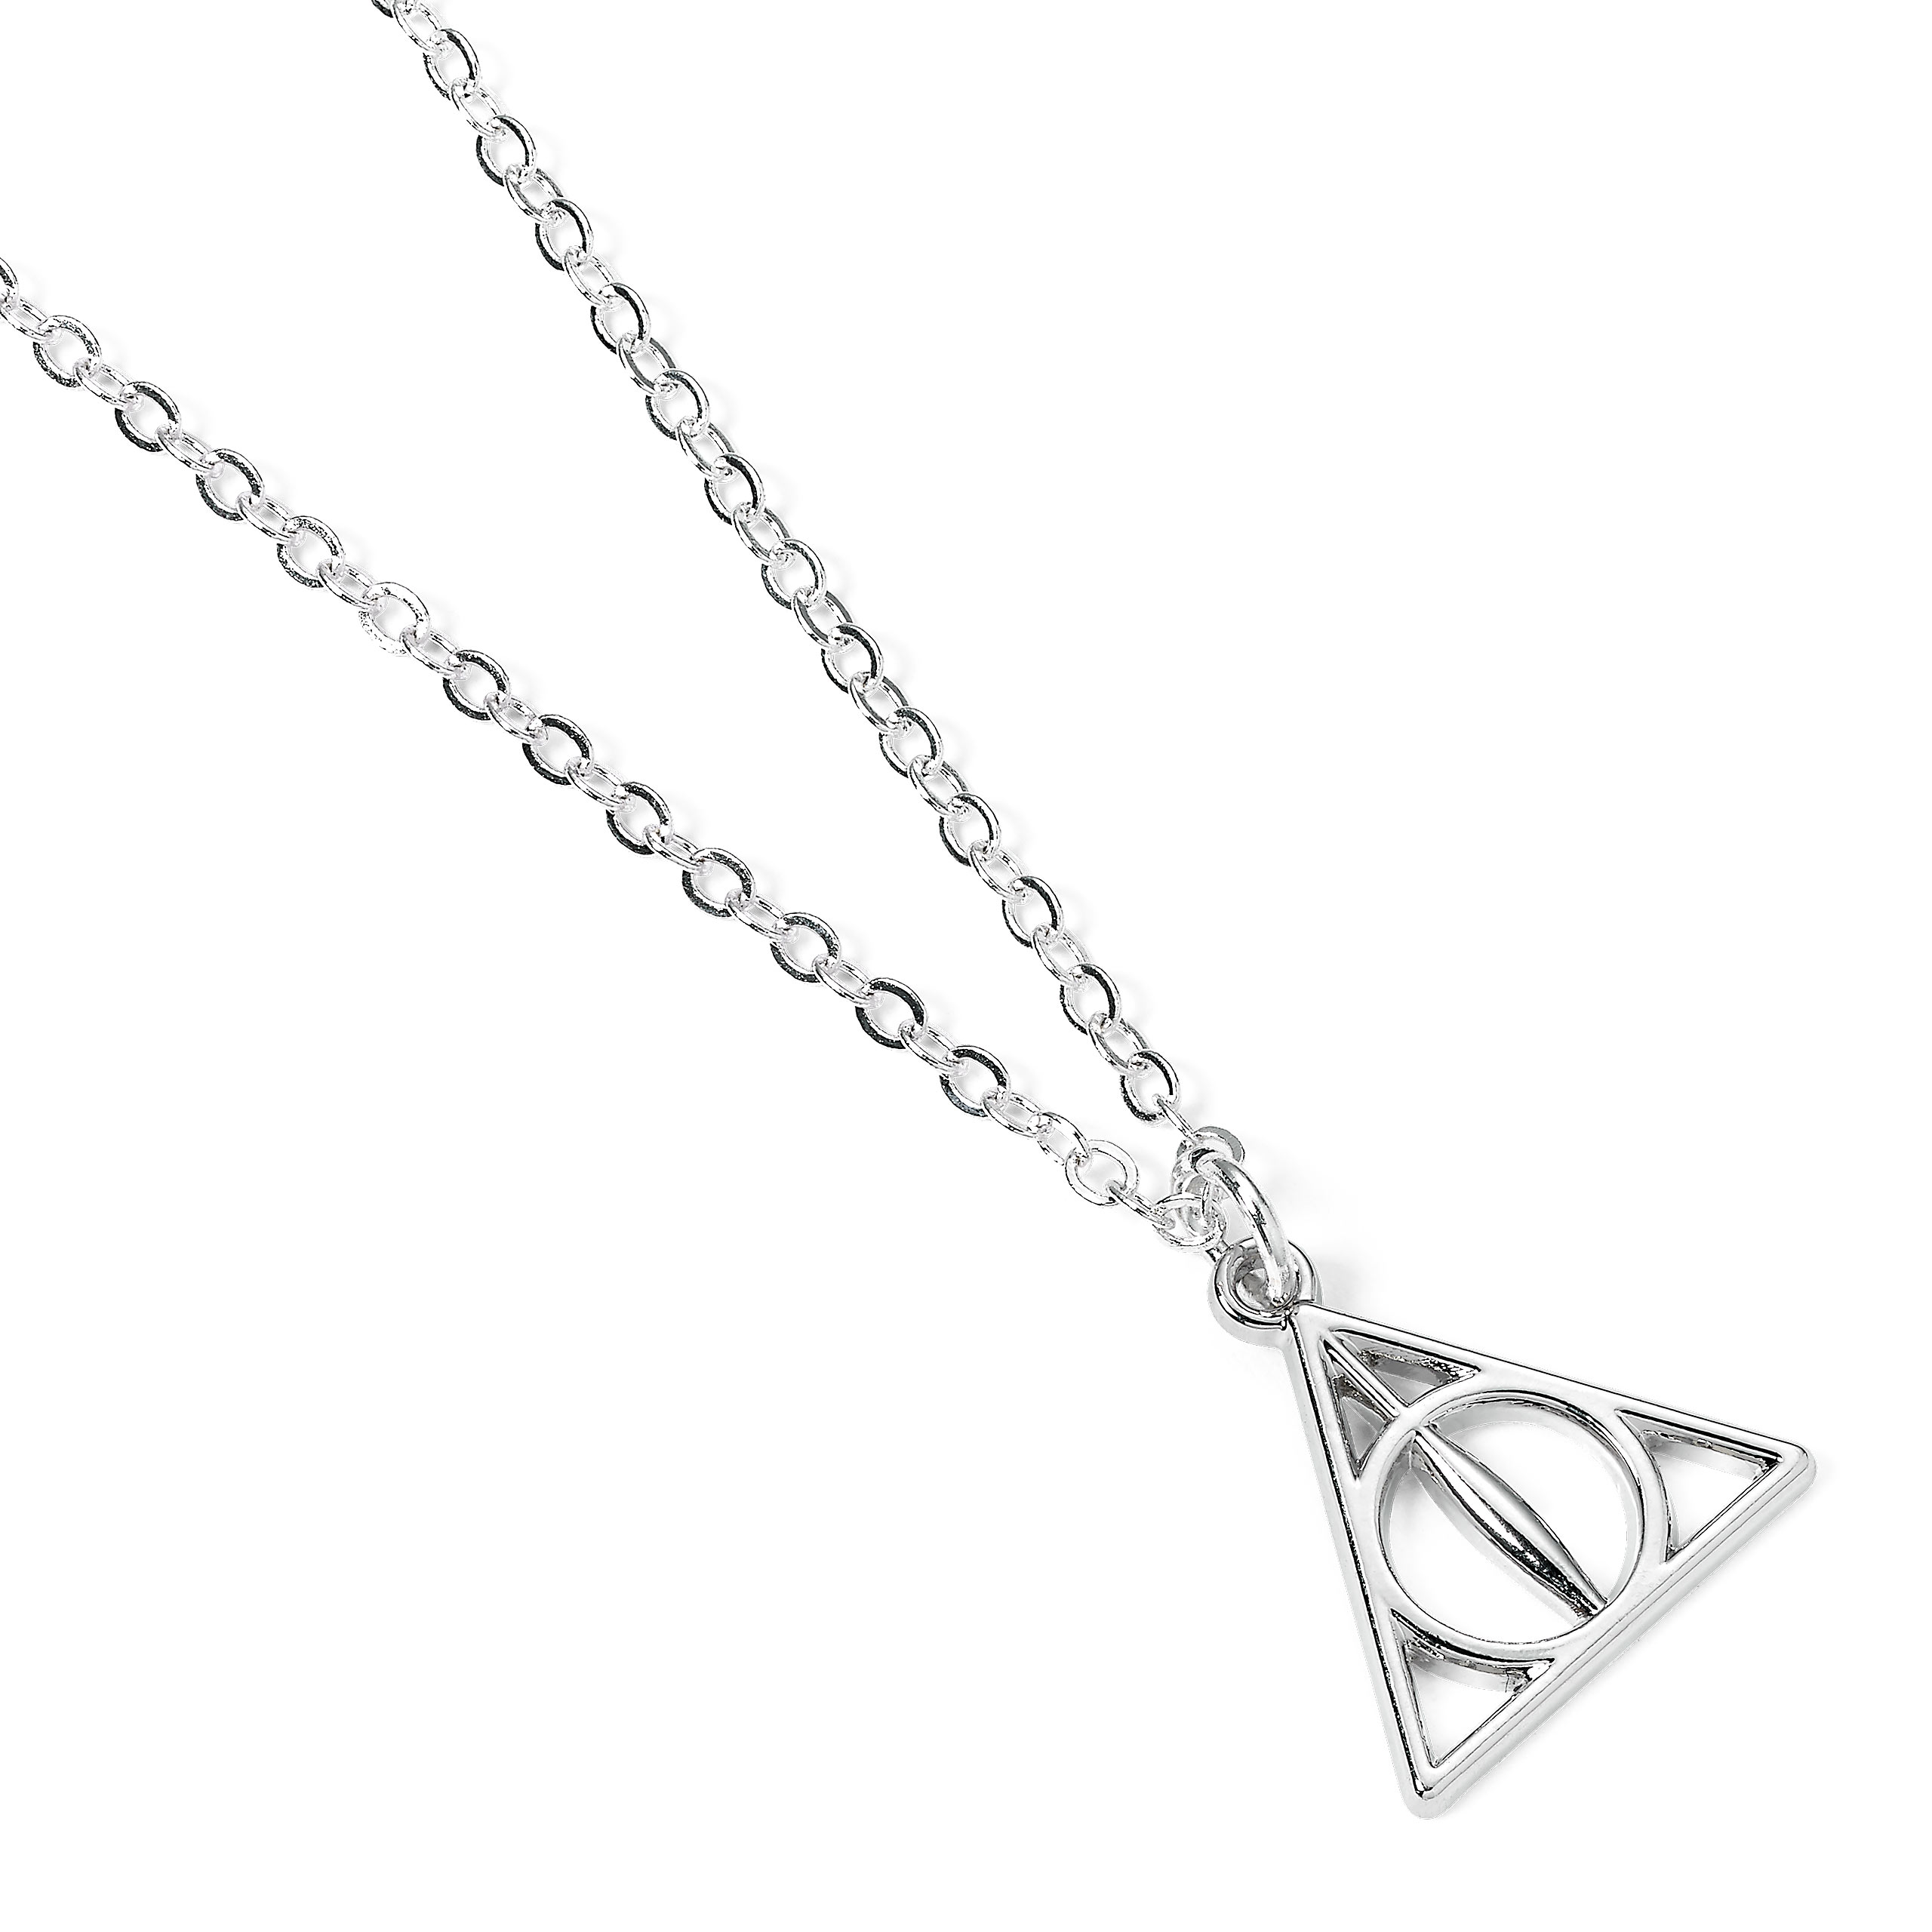 Harry Potter - Deathly Hallows Pendant with Chain